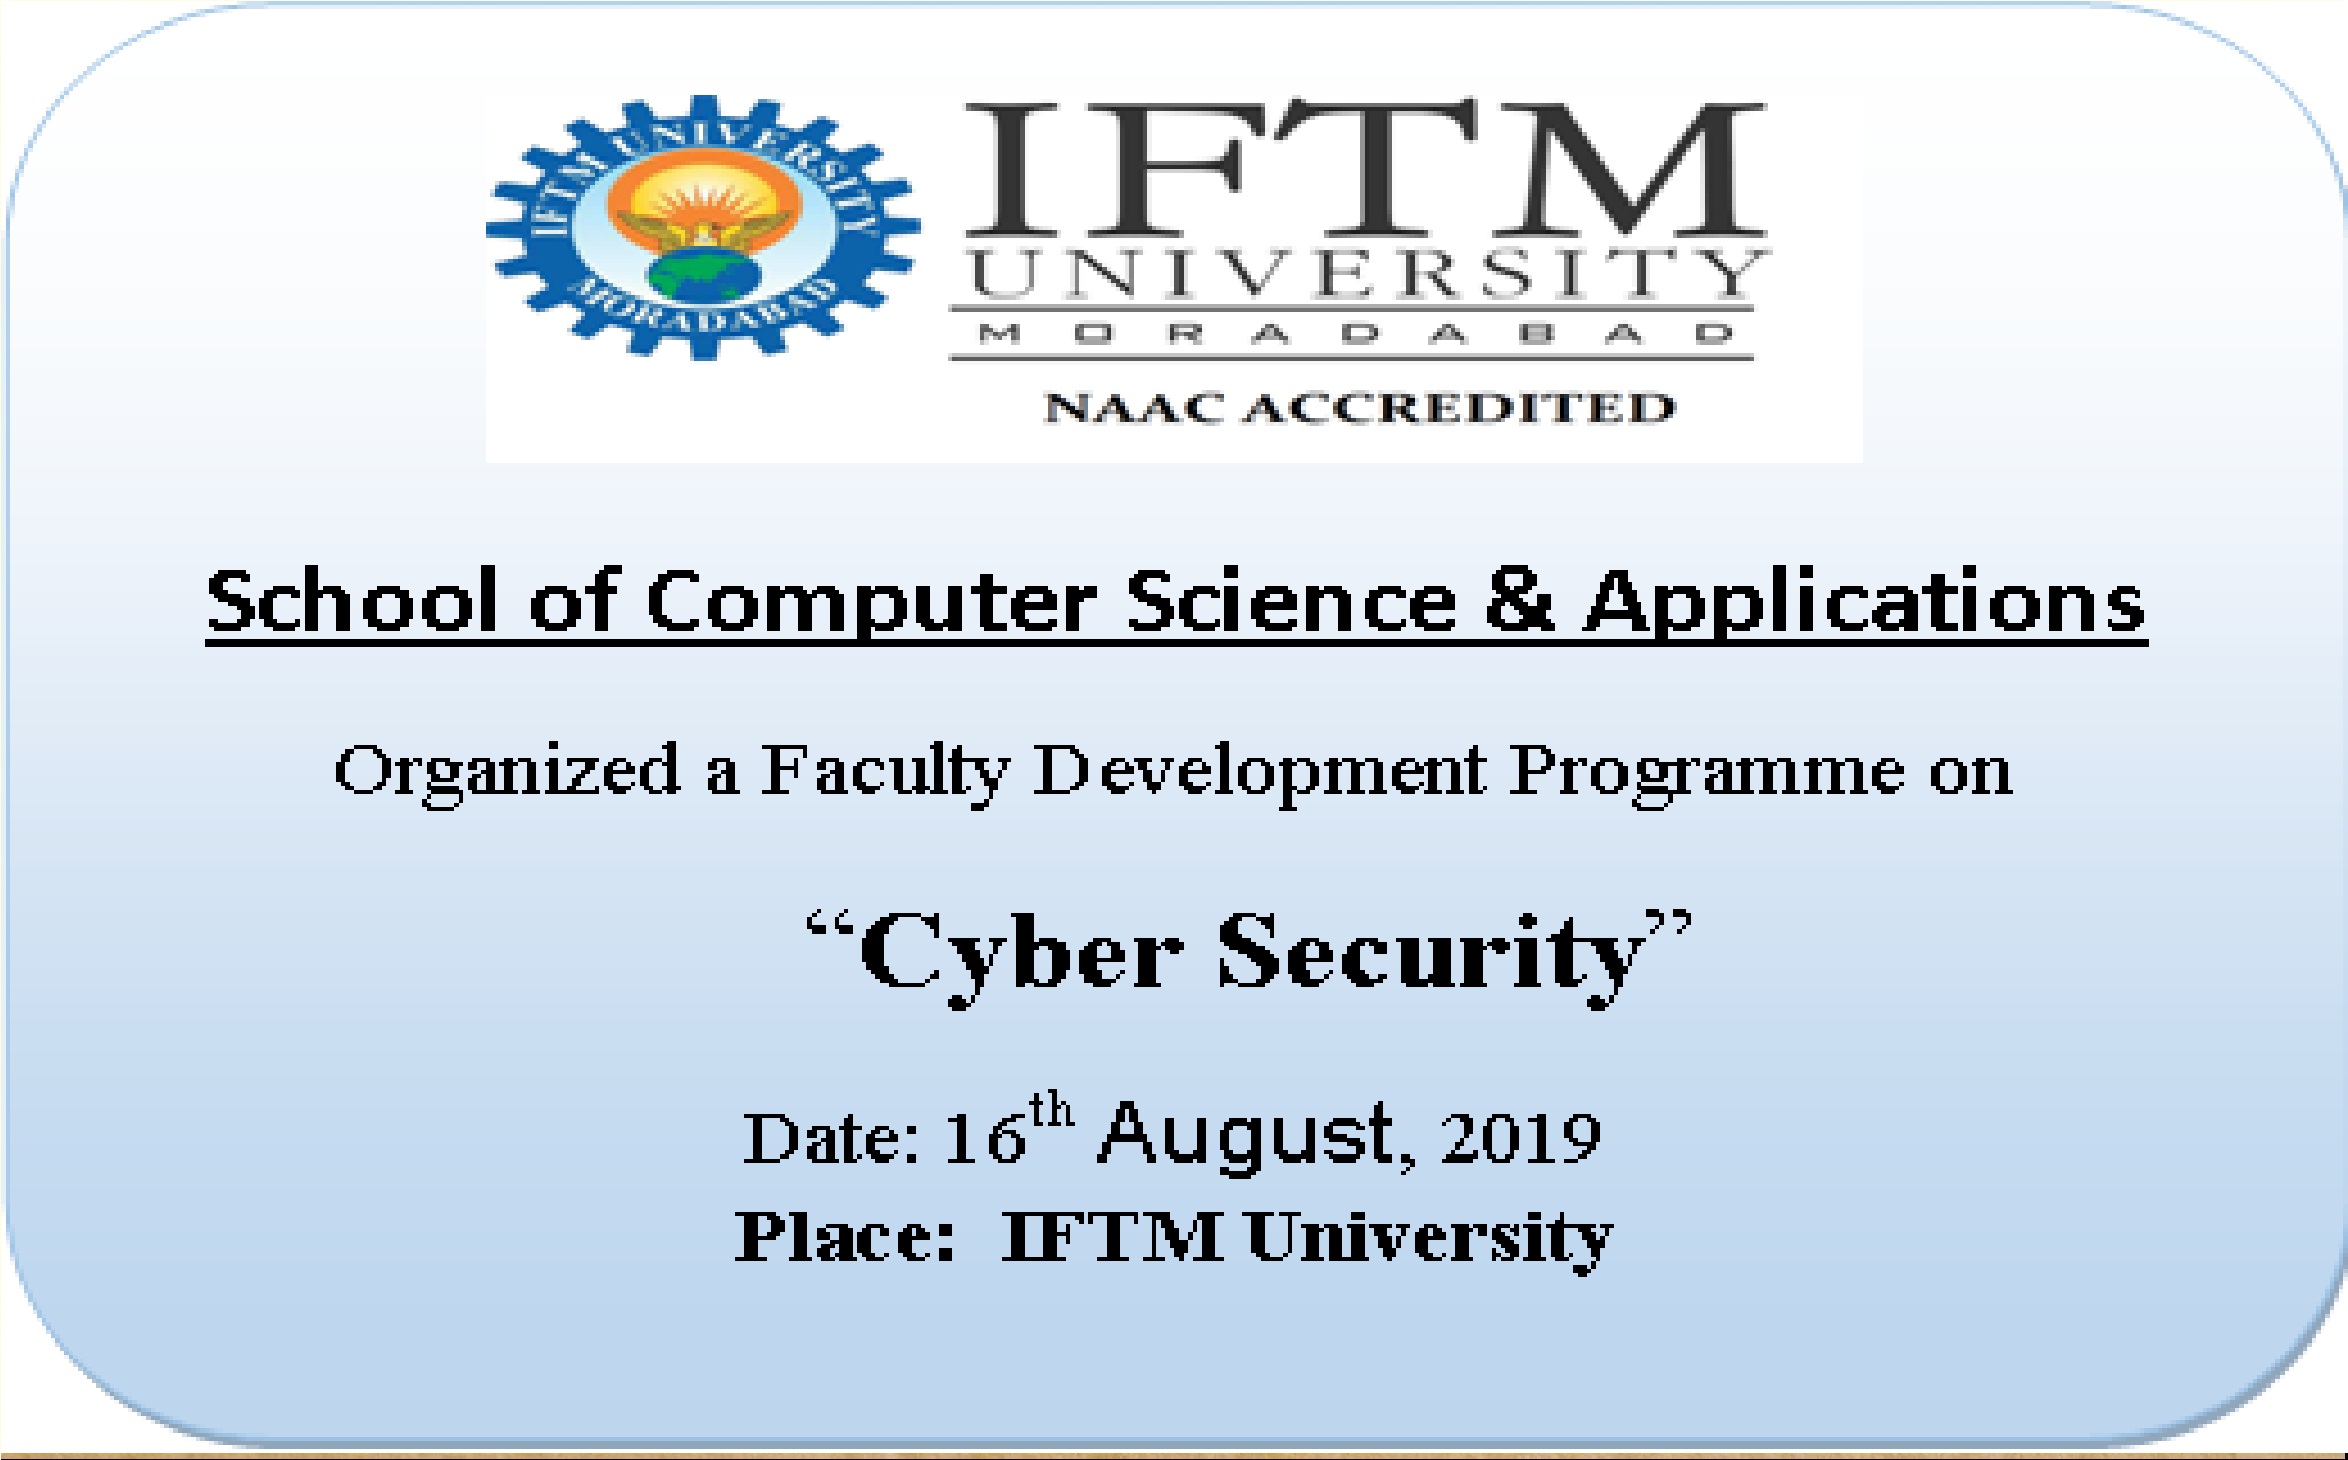 Faculty Development Programme on Cyber Security